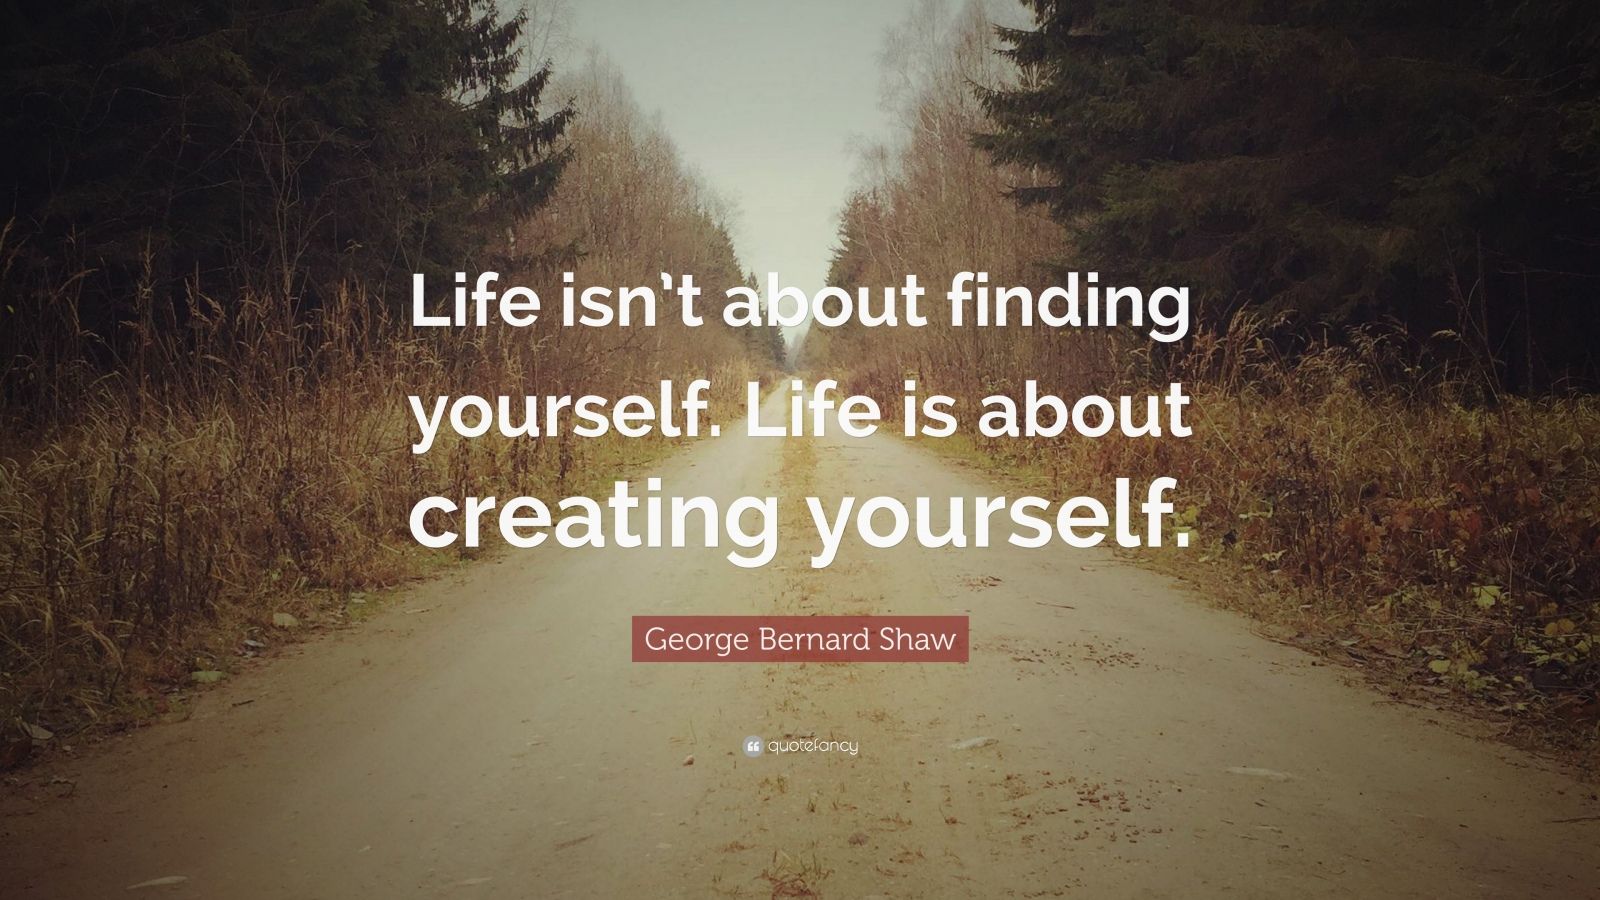 George Bernard Shaw Quote: “Life isn’t about finding yourself. Life is ...